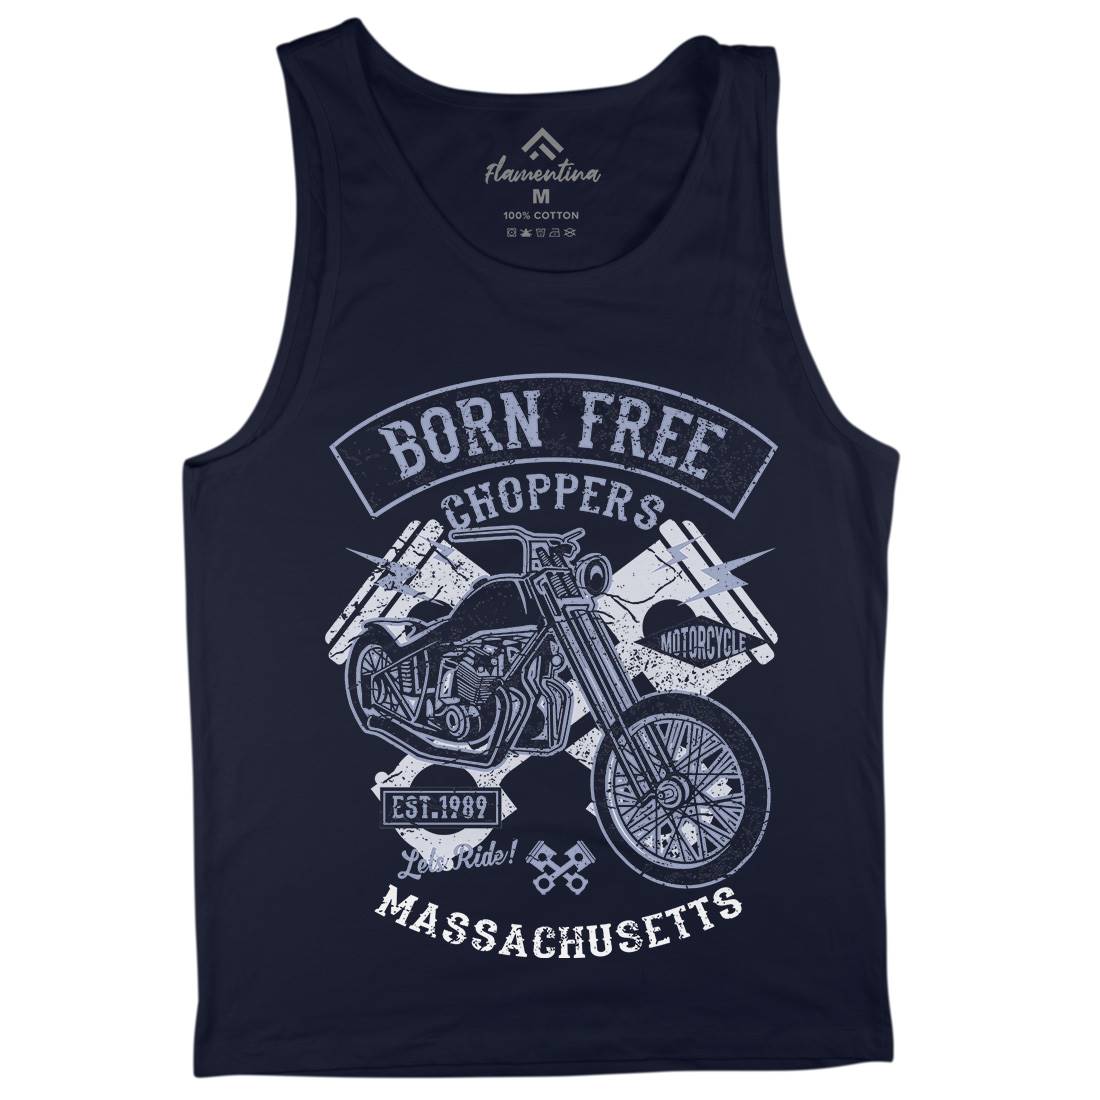 Born Free Choppers Mens Tank Top Vest Motorcycles A018